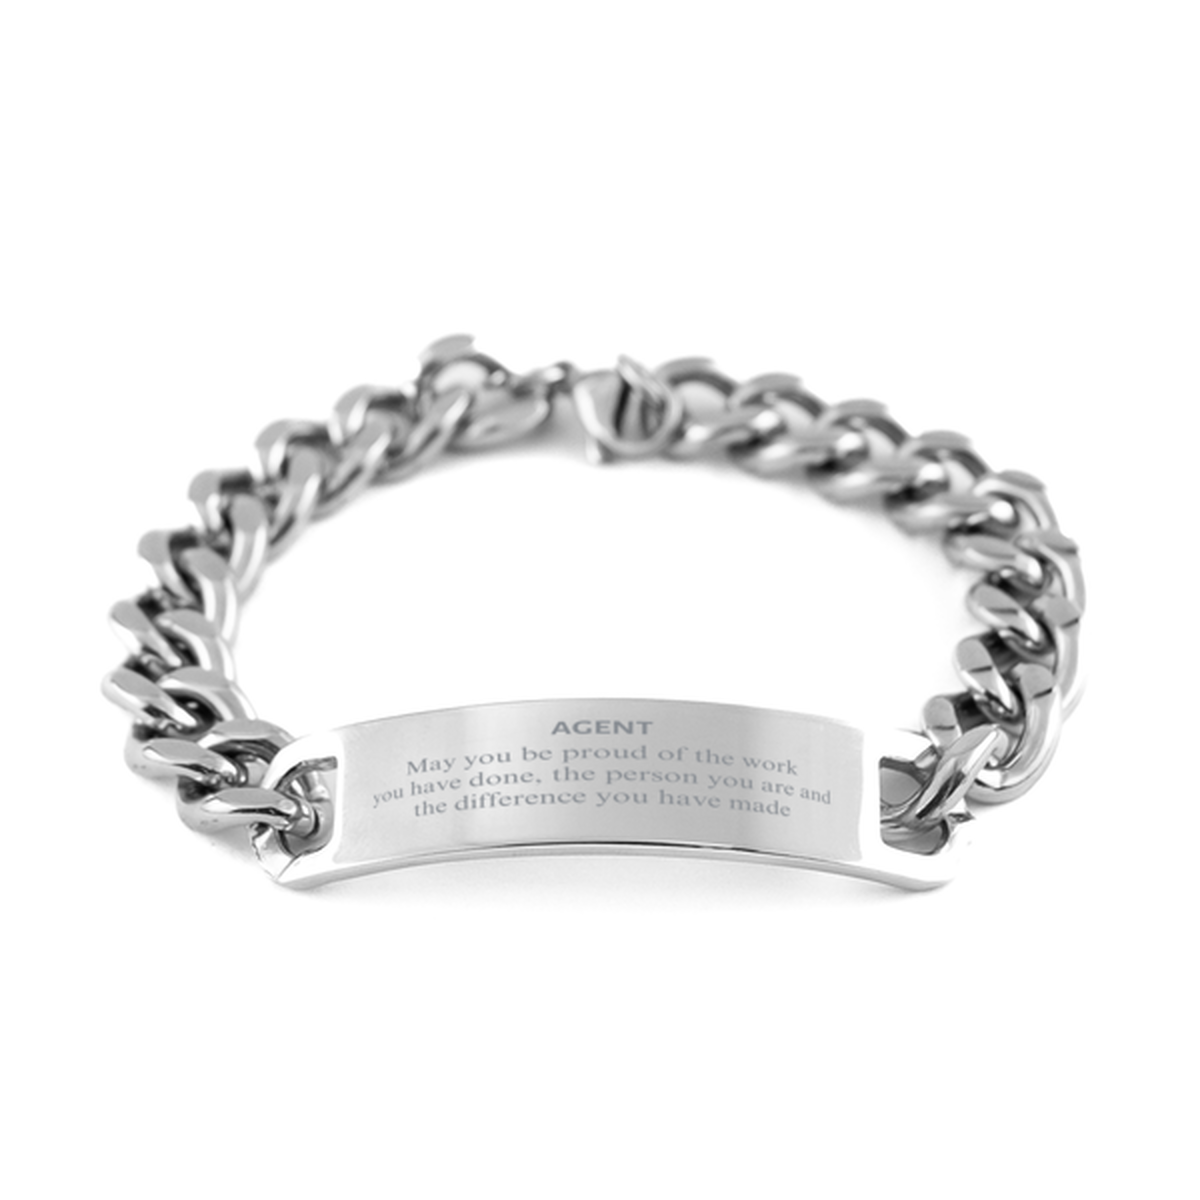 Agent May you be proud of the work you have done, Retirement Agent Cuban Chain Stainless Steel Bracelet for Colleague Appreciation Gifts Amazing for Agent